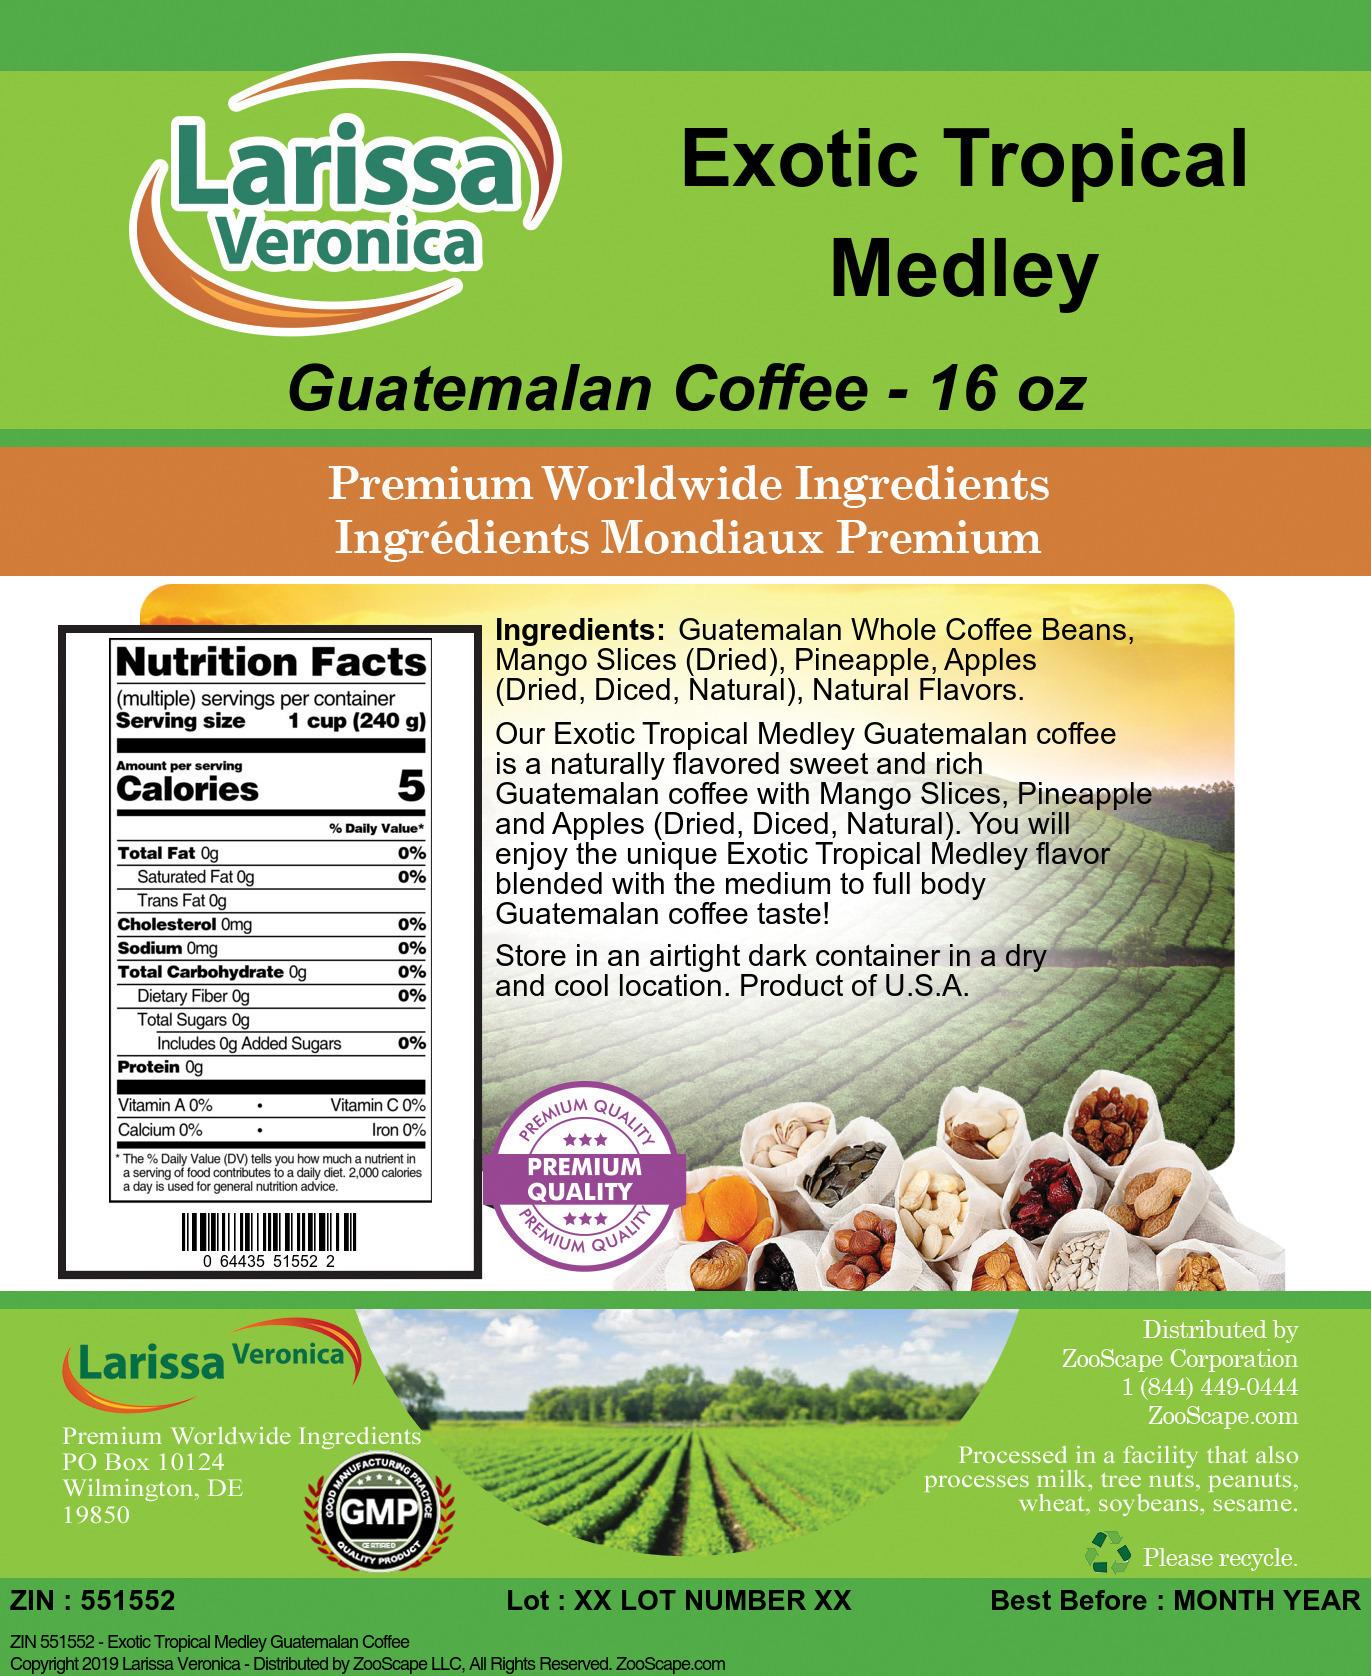 Exotic Tropical Medley Guatemalan Coffee - Label